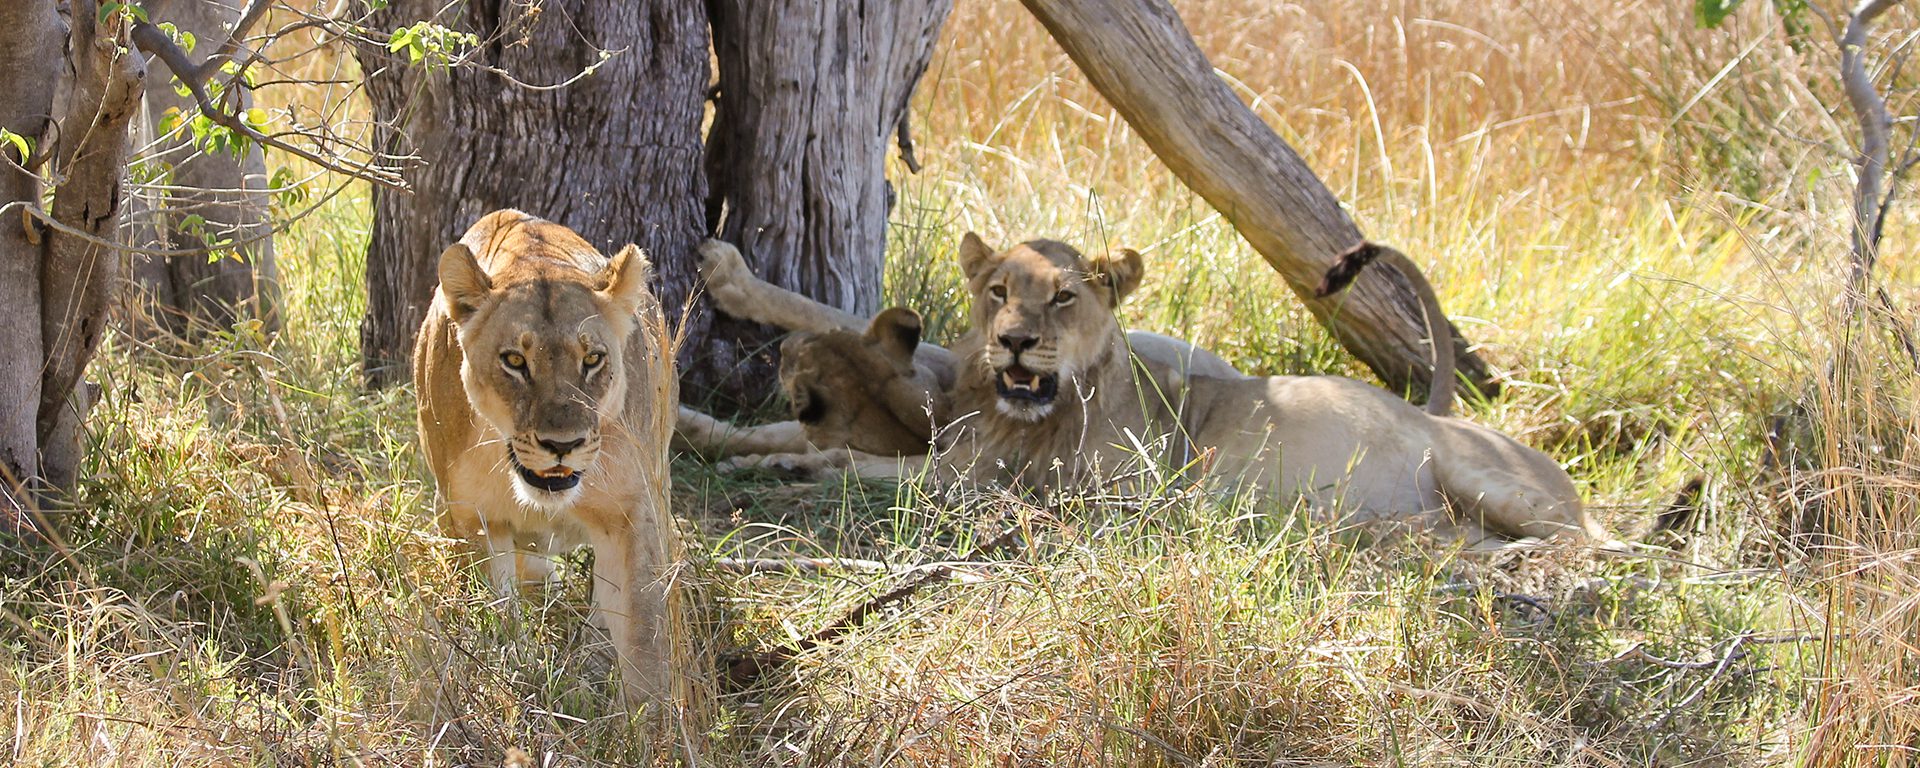 g2a_botswana_mamma-and-her-very-well-fed-teenage-cubs-2_moremi